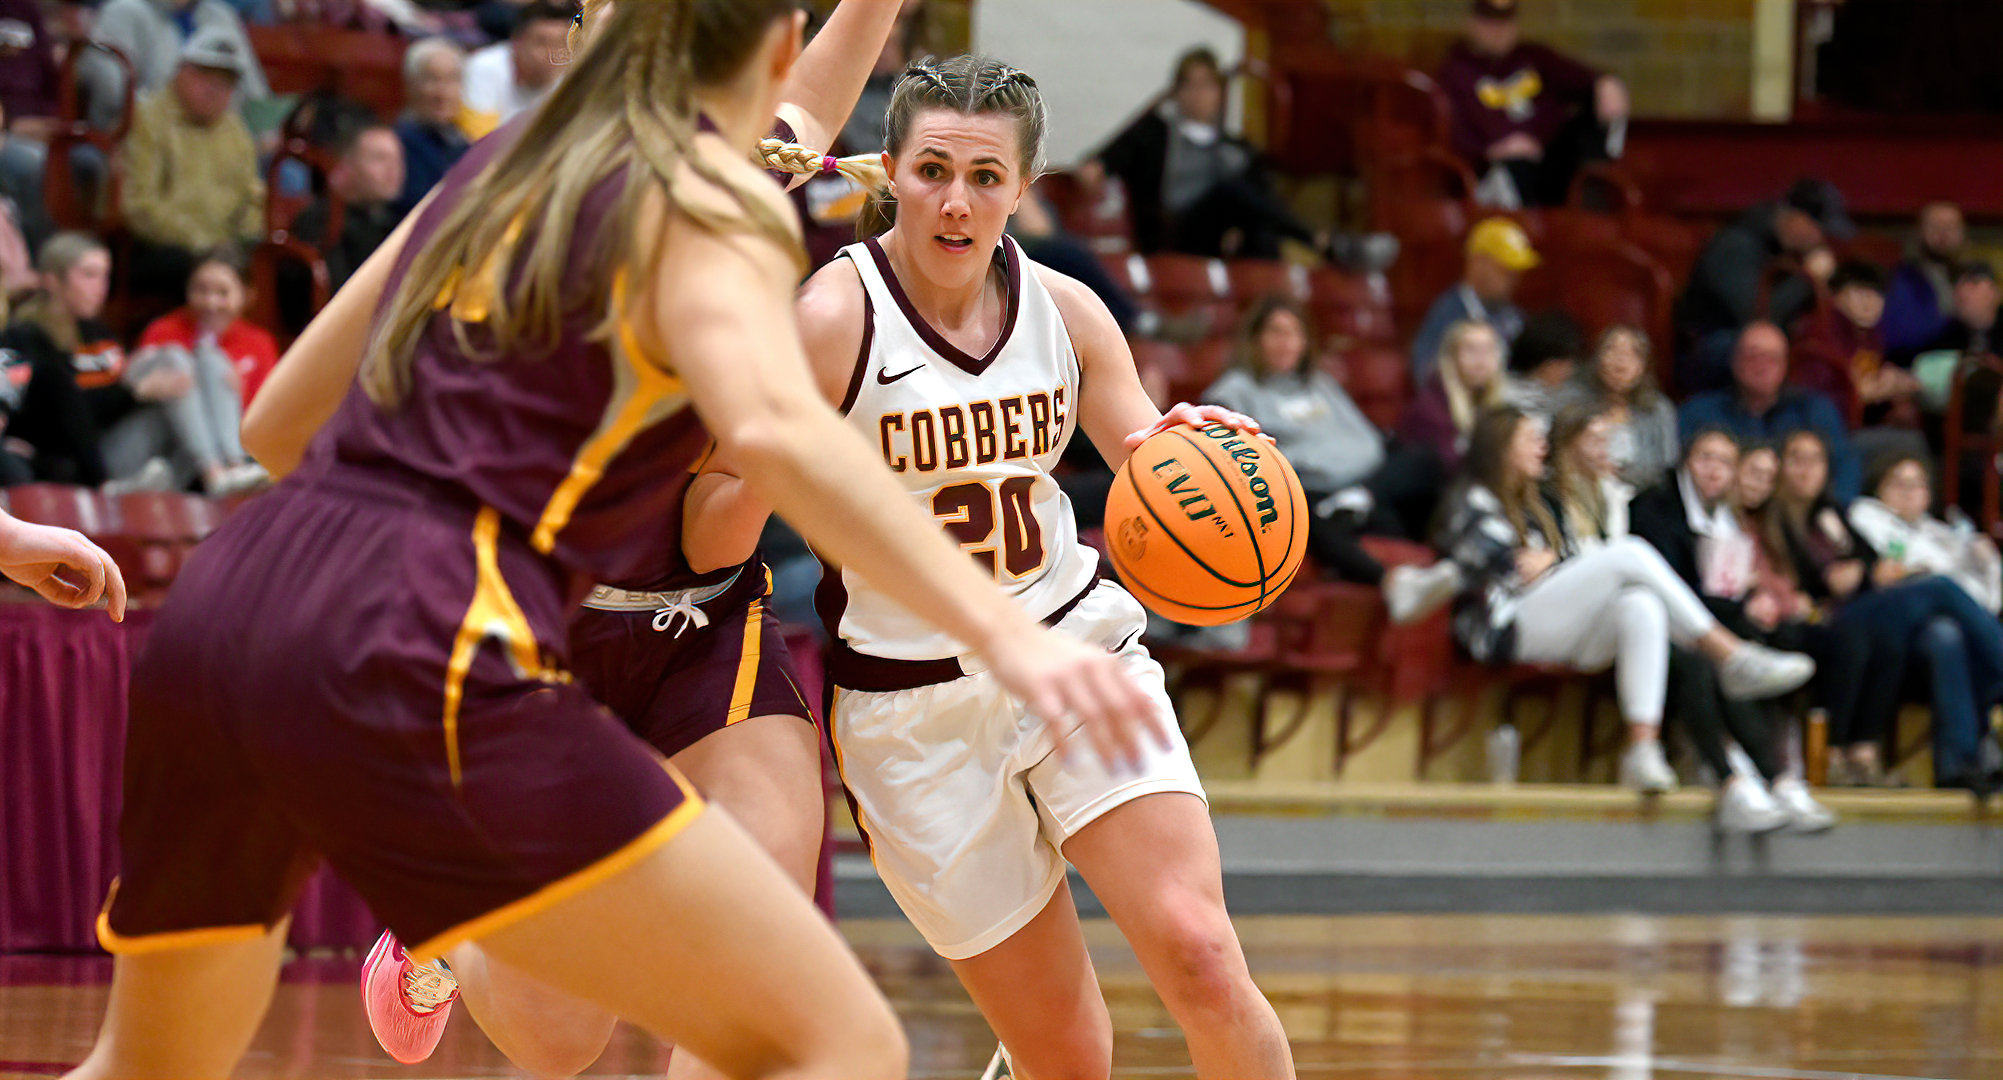 Emily Beseman was 7-for-8 from the free throw line and had 13 points to go with four assists in the Cobbers' game with #9 Wis.-Whitewater.